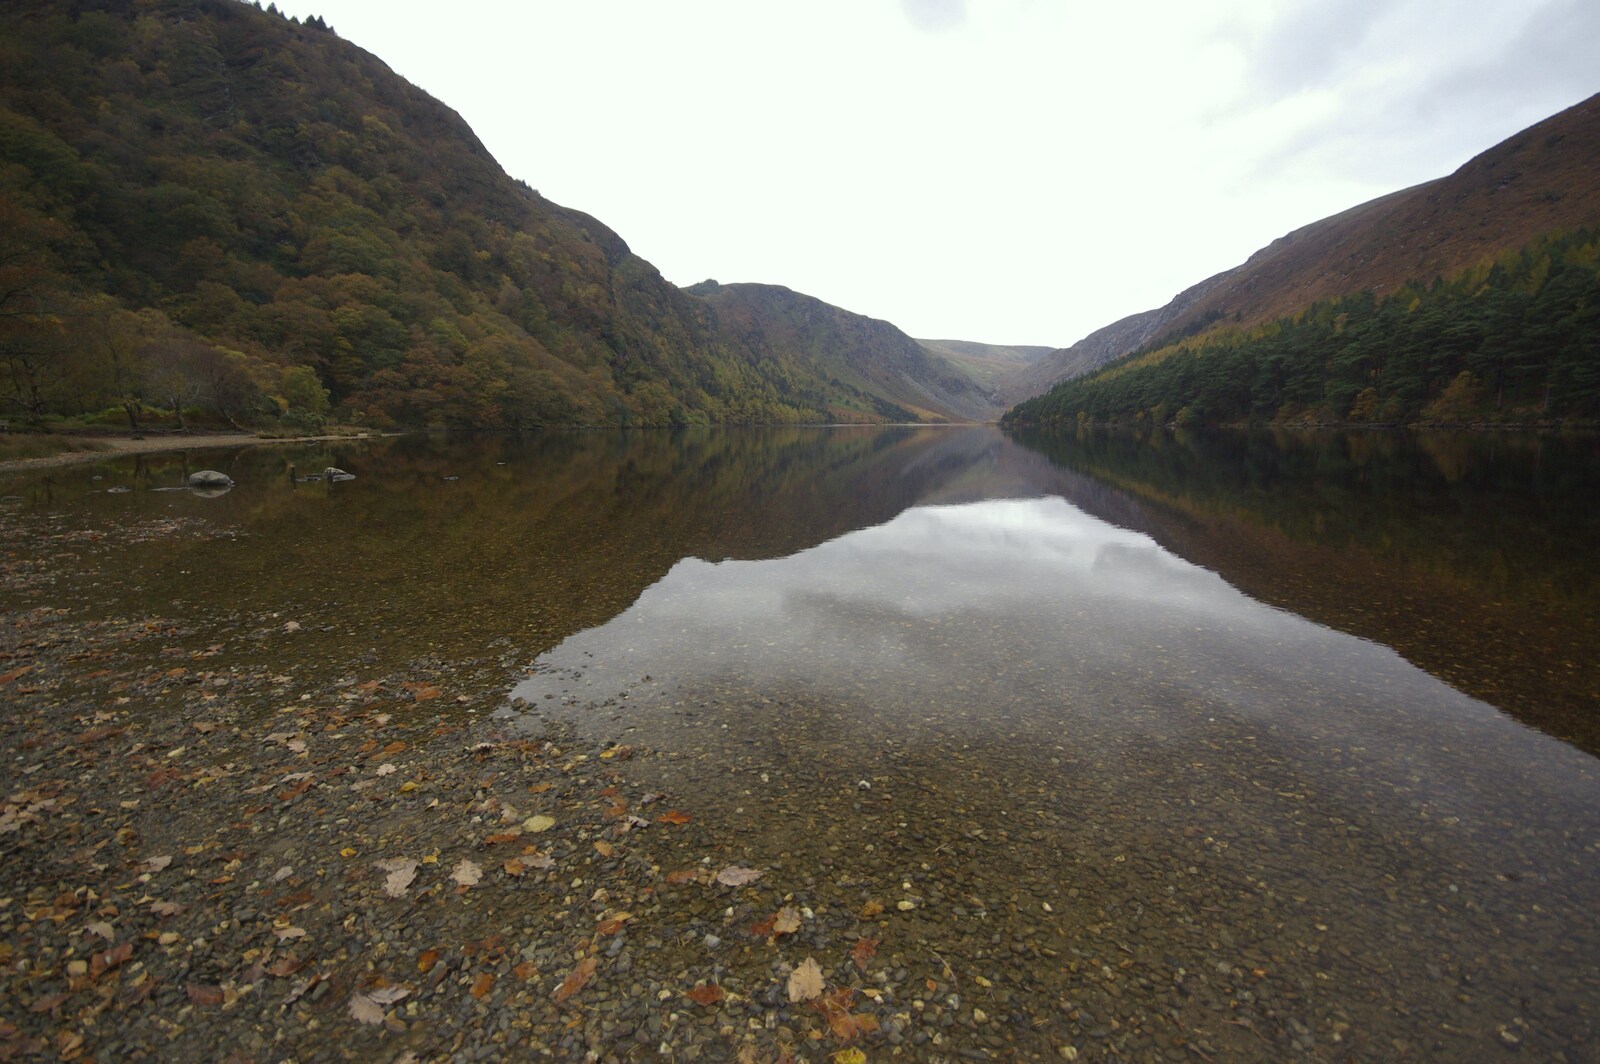 Glendalough from Reflections: A Day at Glendalough, County Wicklow, Ireland - 3rd November 2007